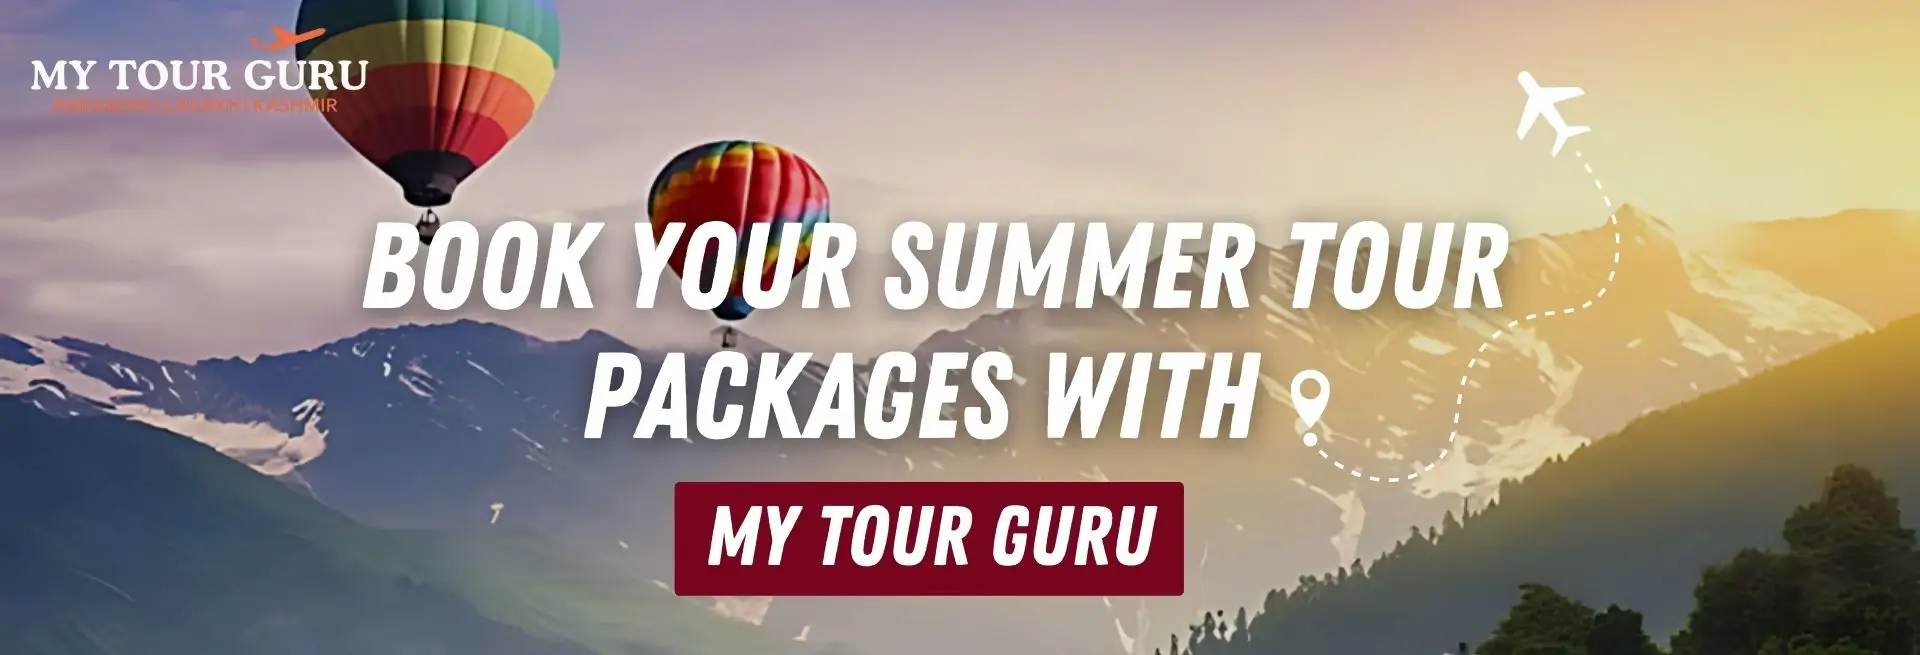 Summer Tour Packages